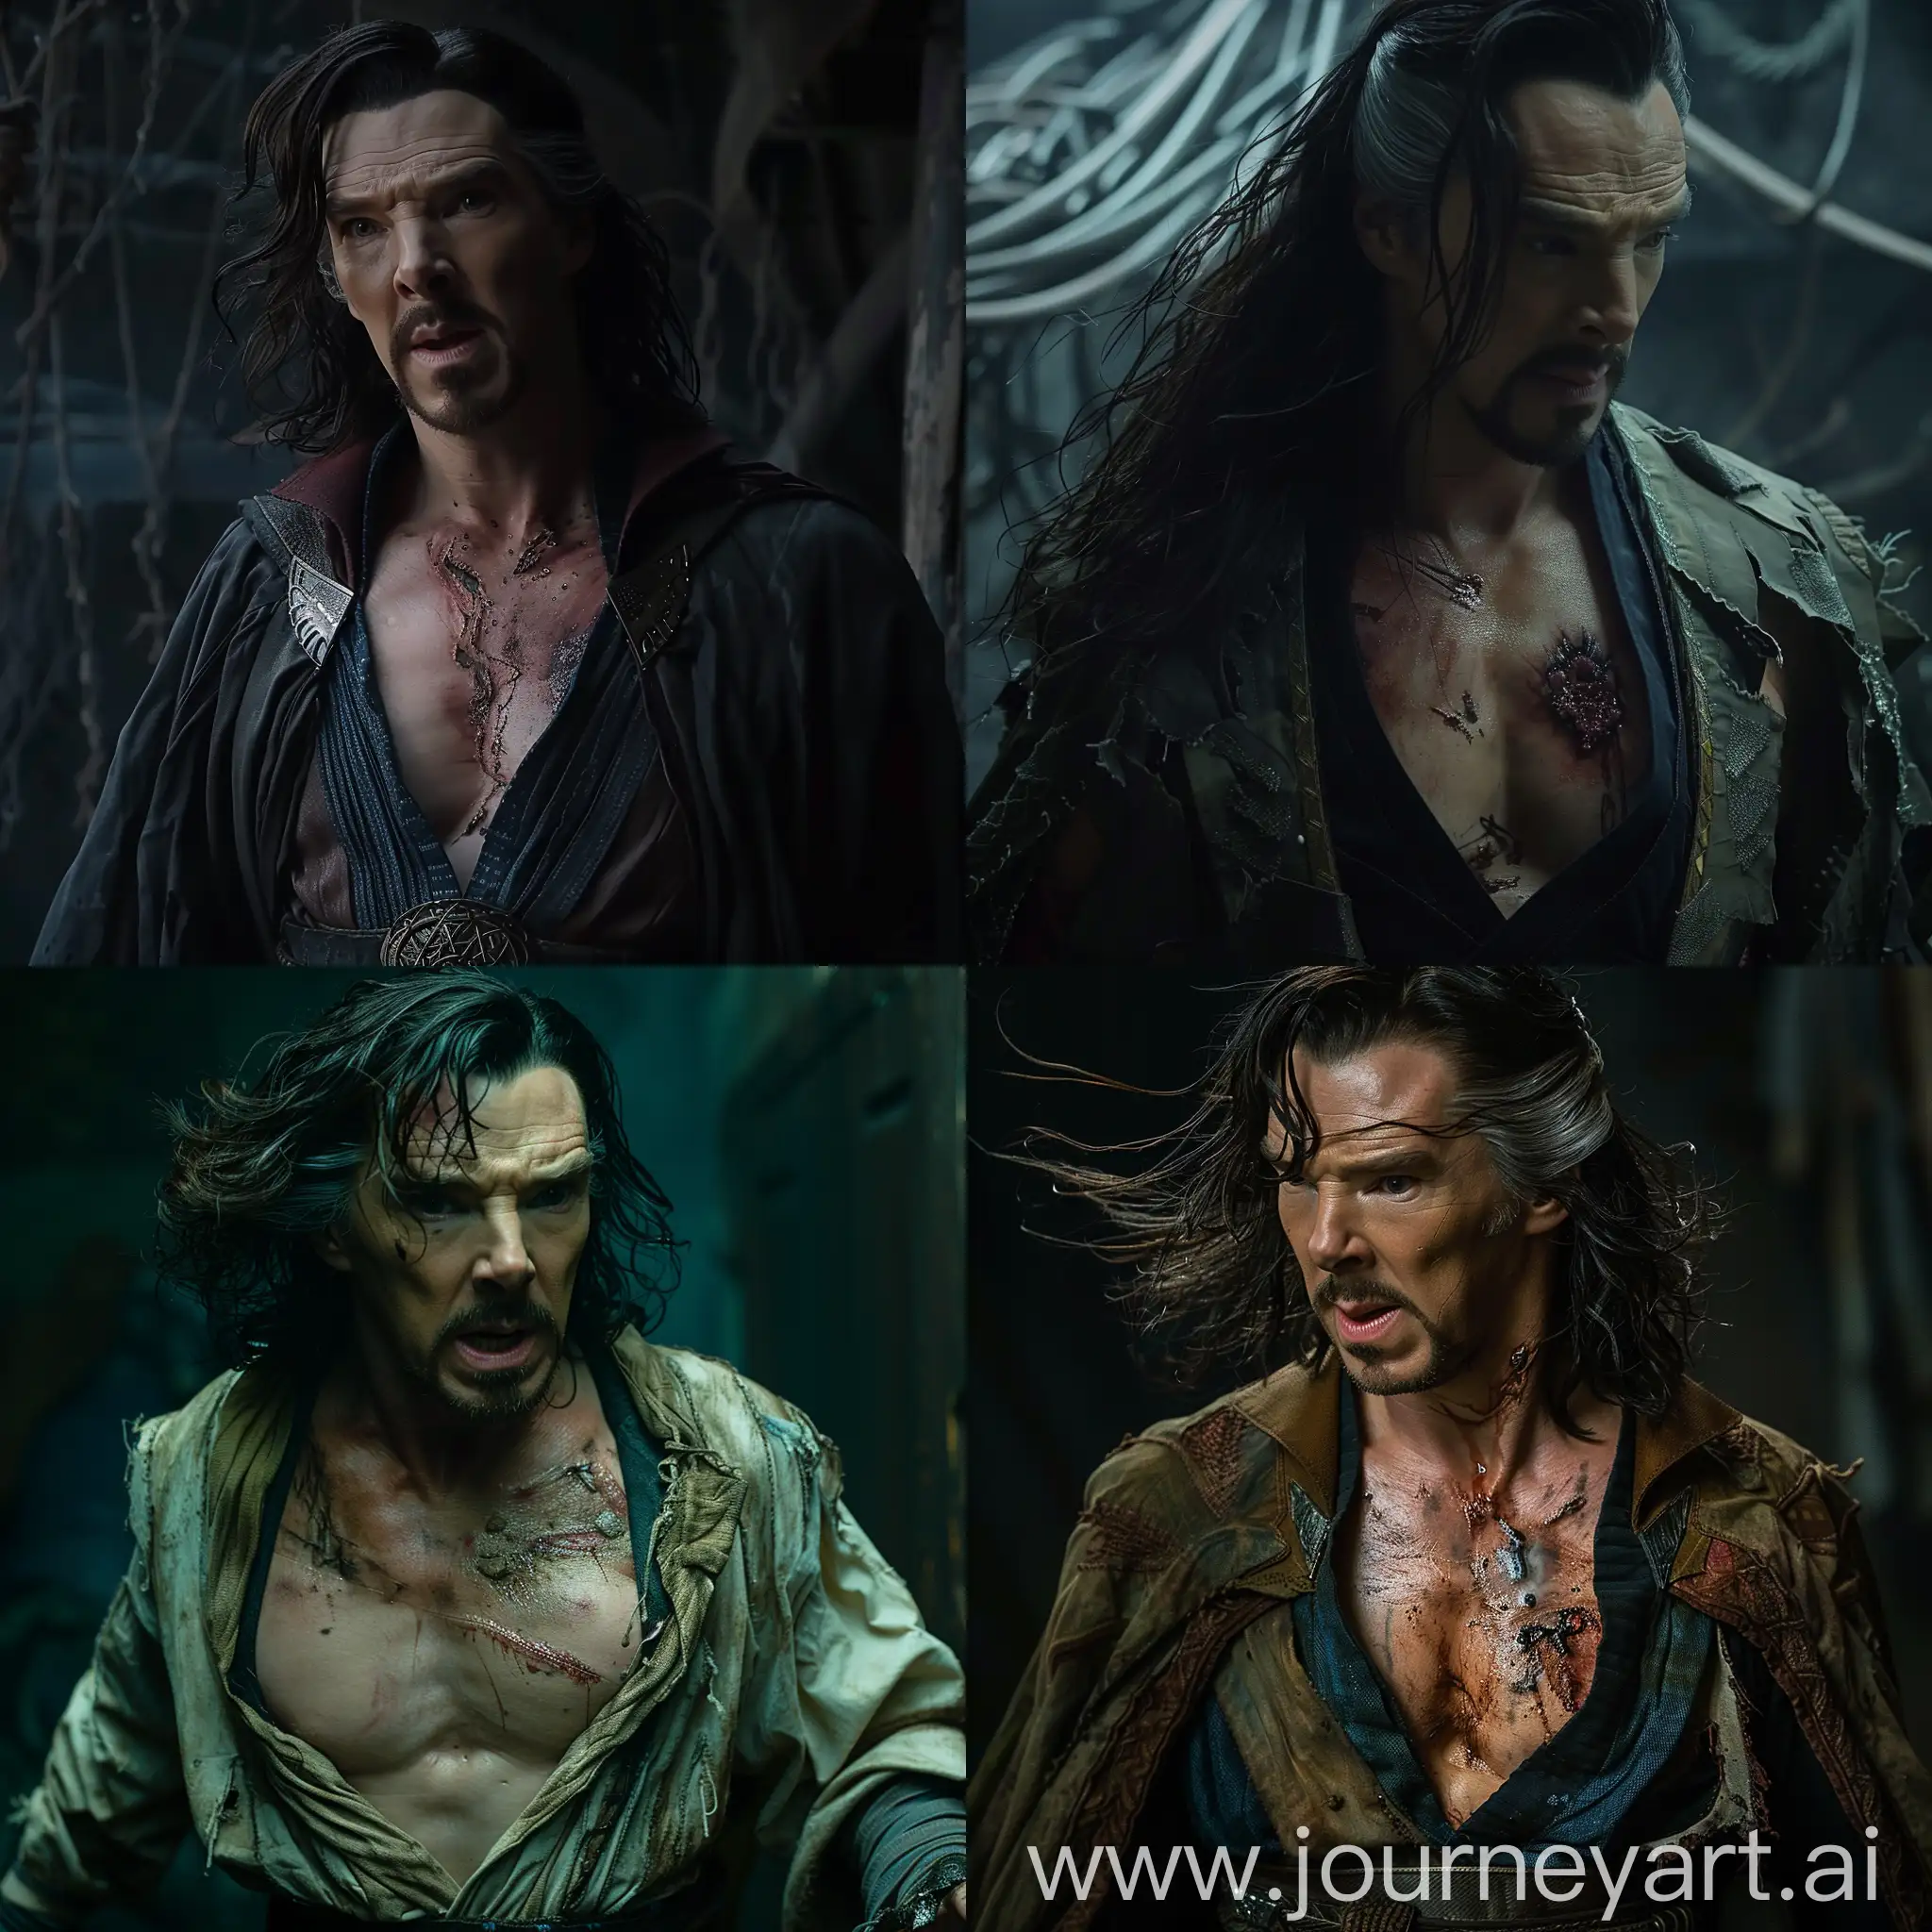 Mystical-Doctor-Strange-in-Dark-Room-with-Exposed-Chest